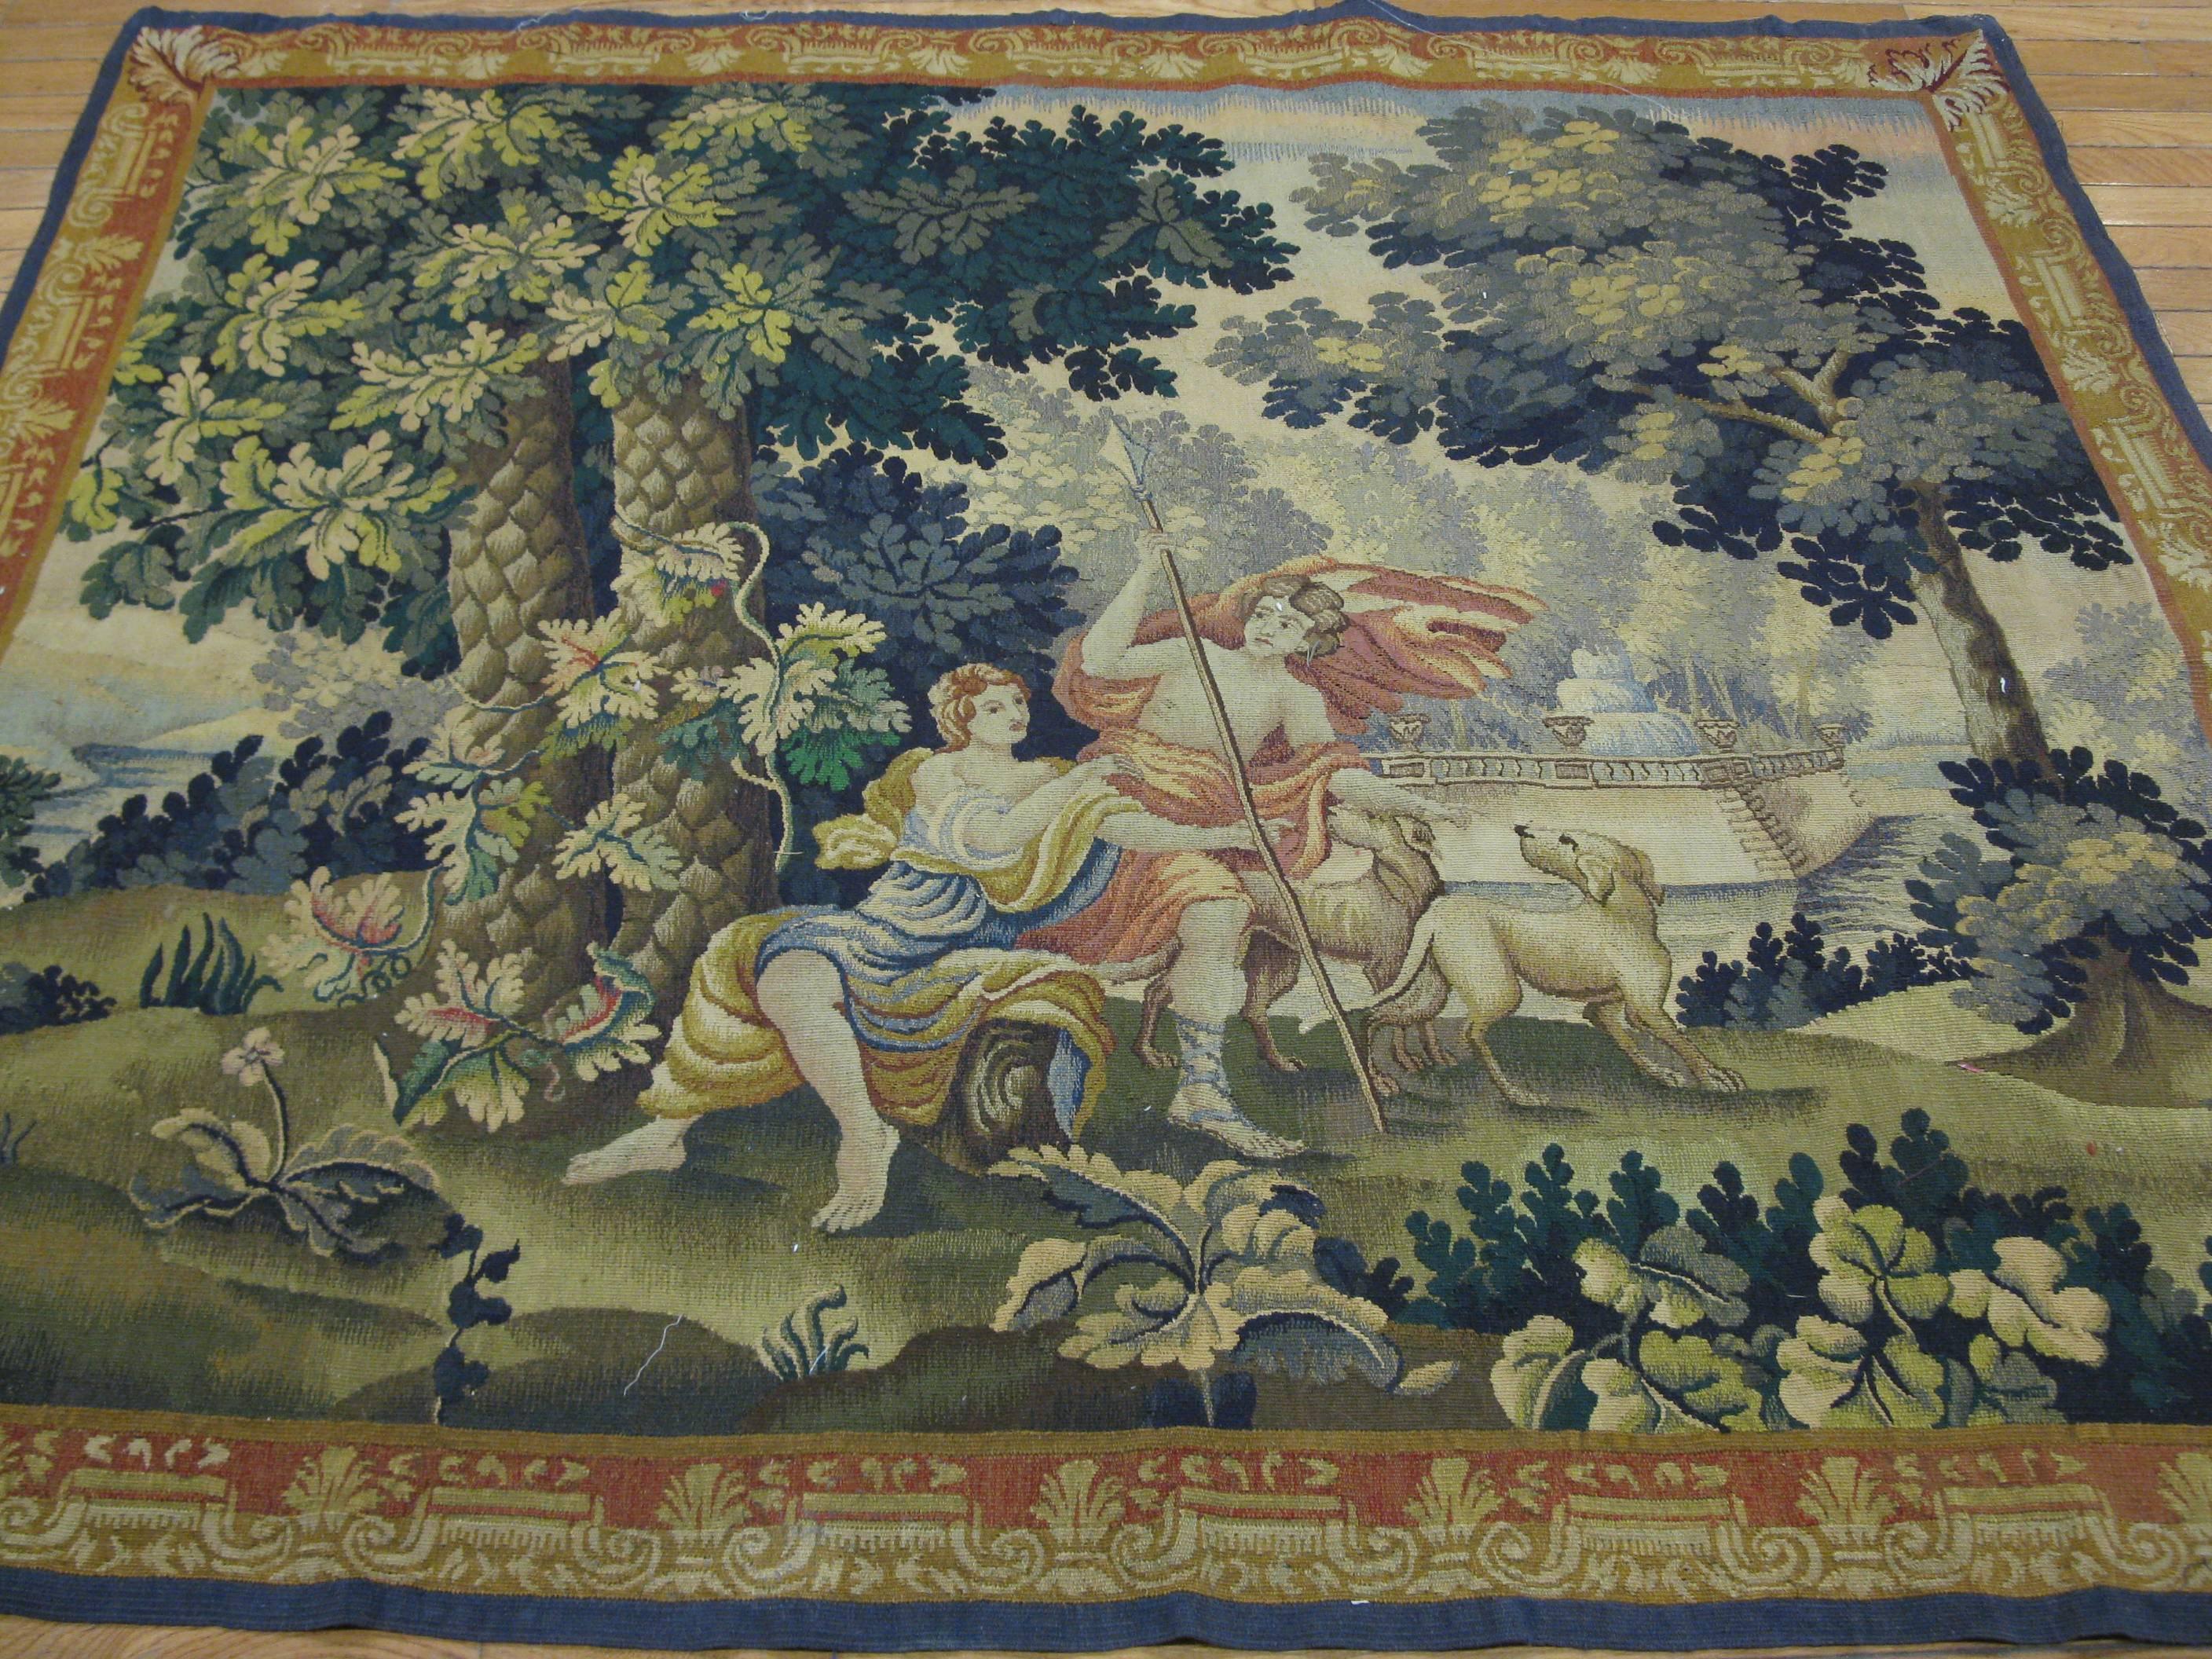 This is an fine genuine antique French Aubusson wall hanging tapestry. It measures 5' x 6' made with a combination of wool and silk. It is in great condition.